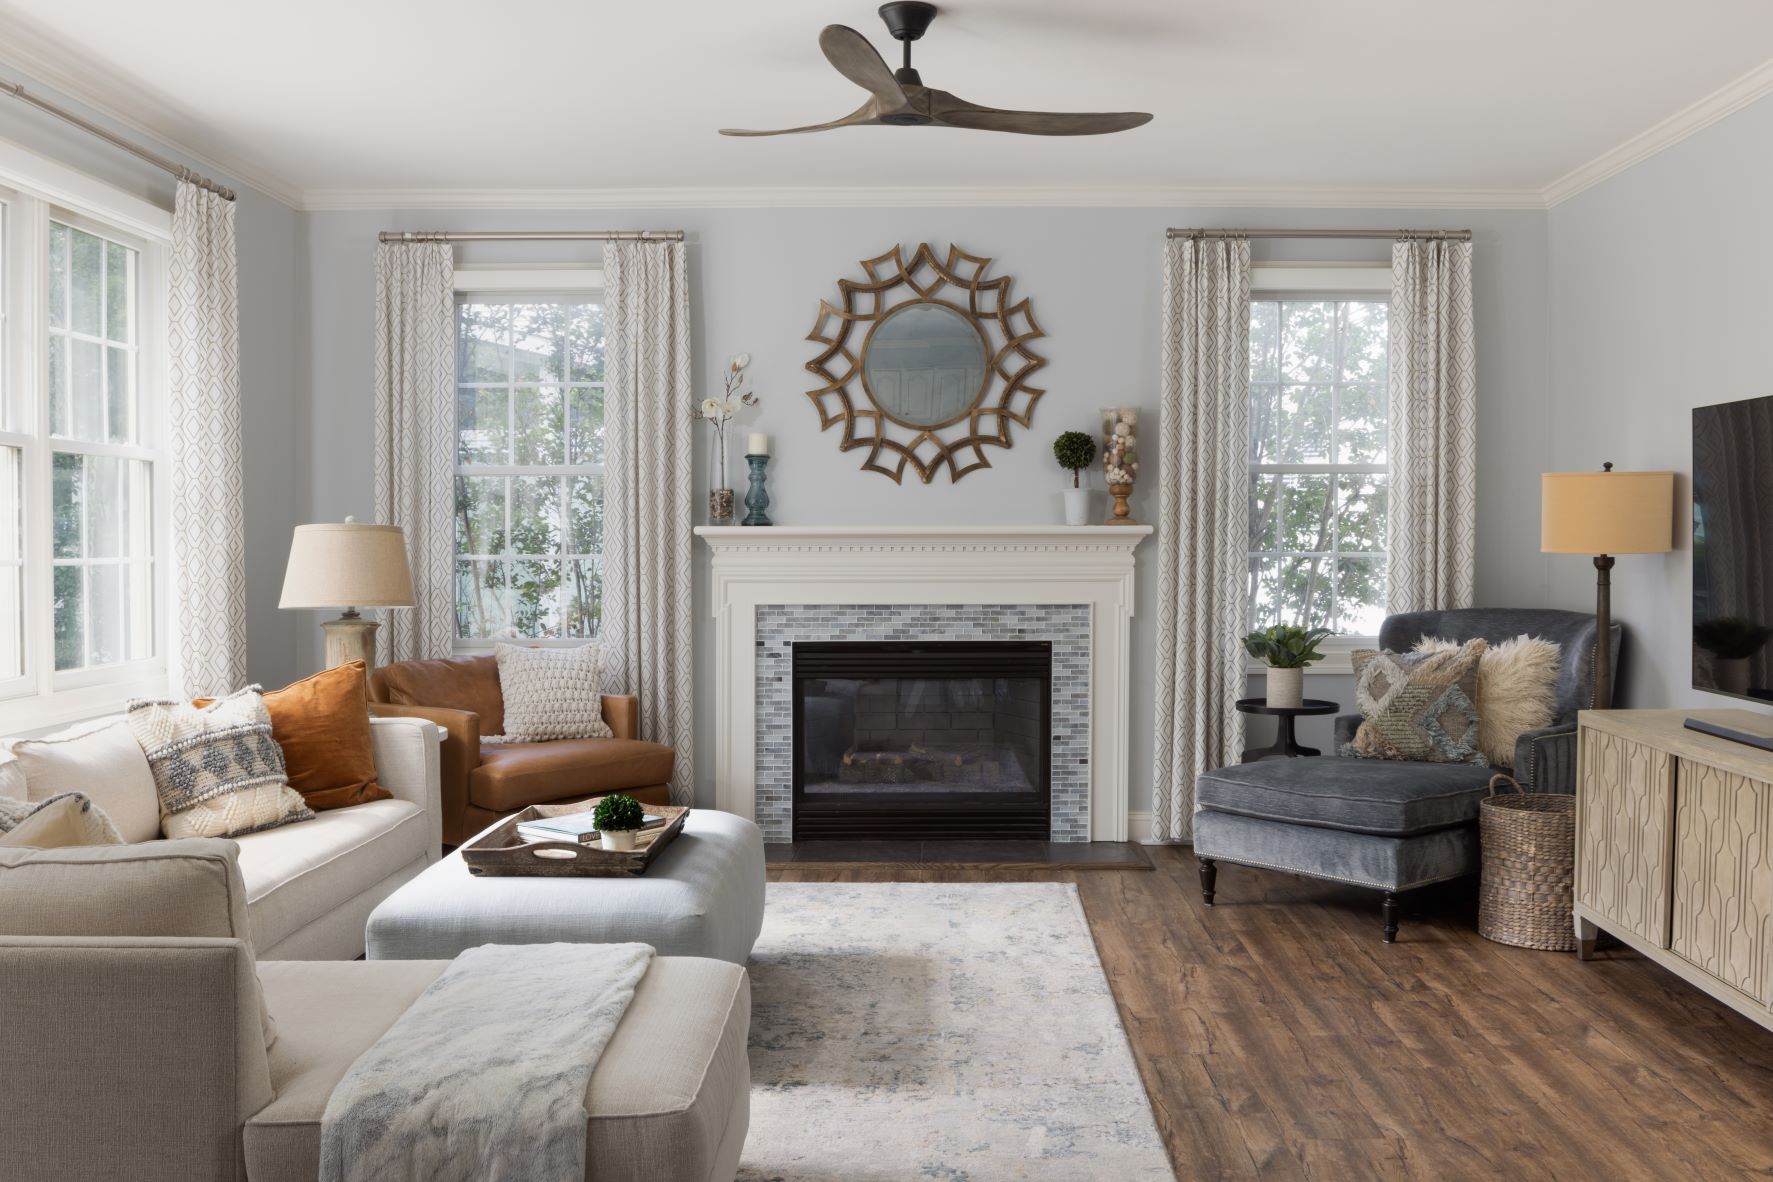 Eclectic and Cozy Family Room